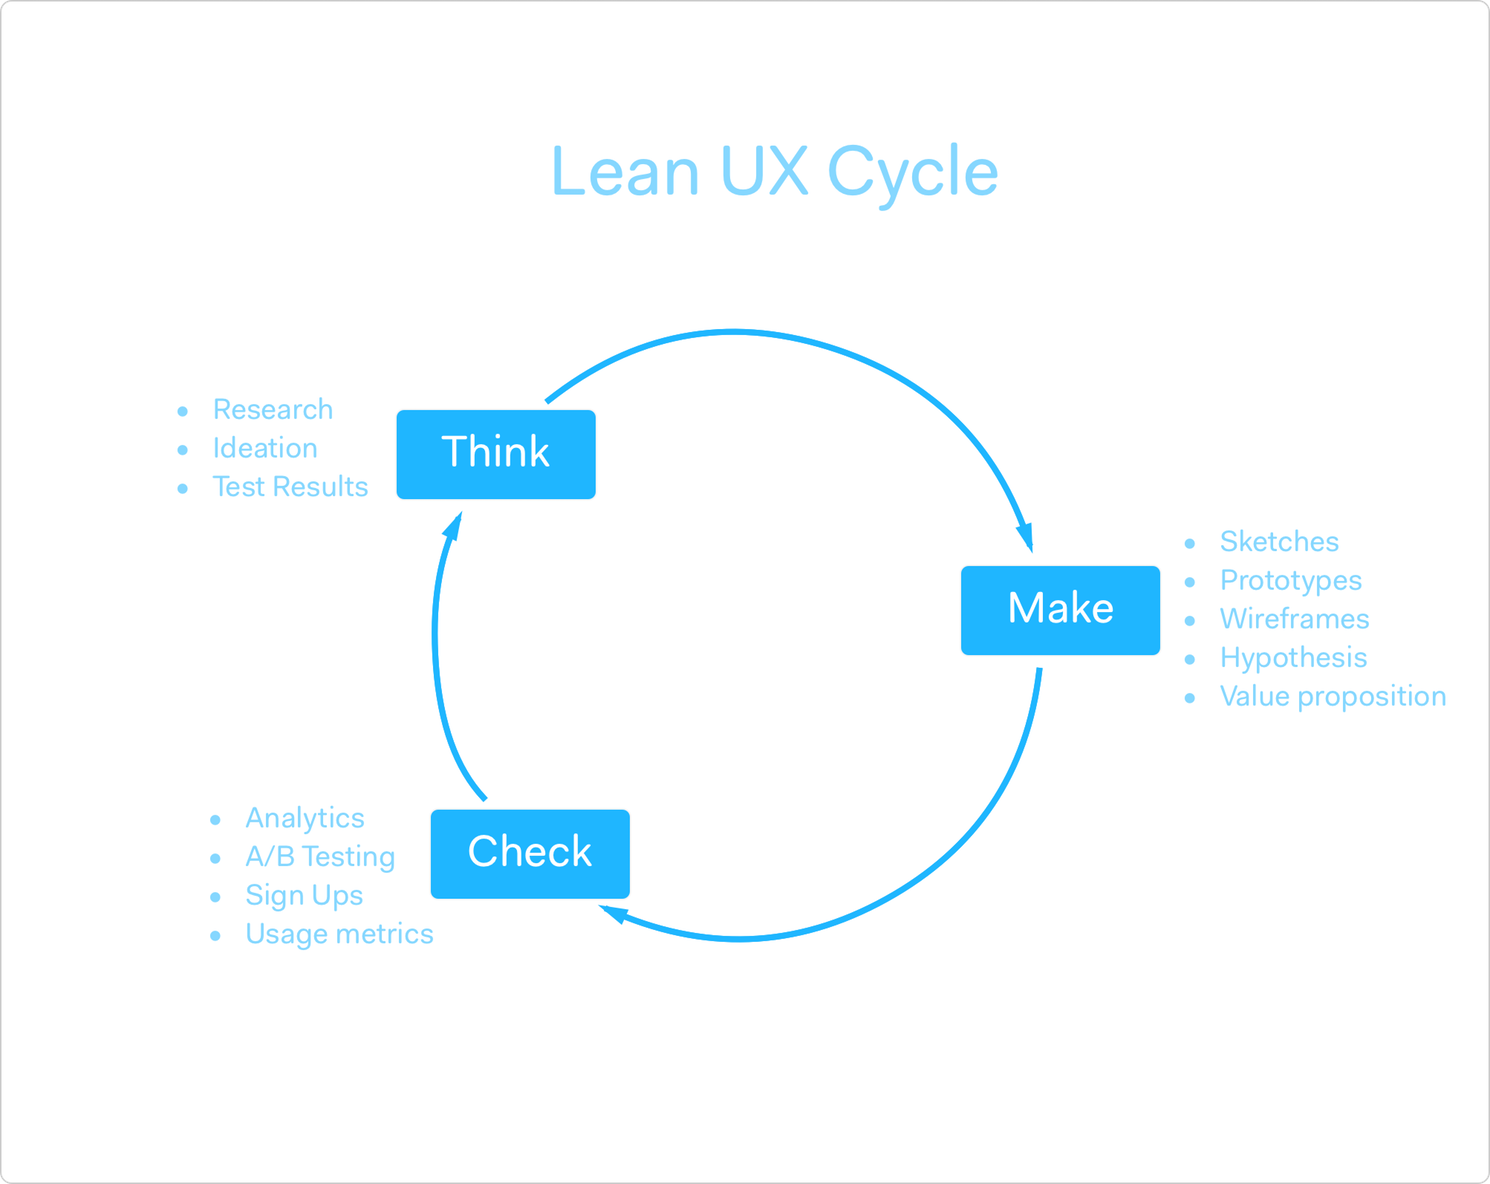 Lean UX cycle of thinking, making and checking